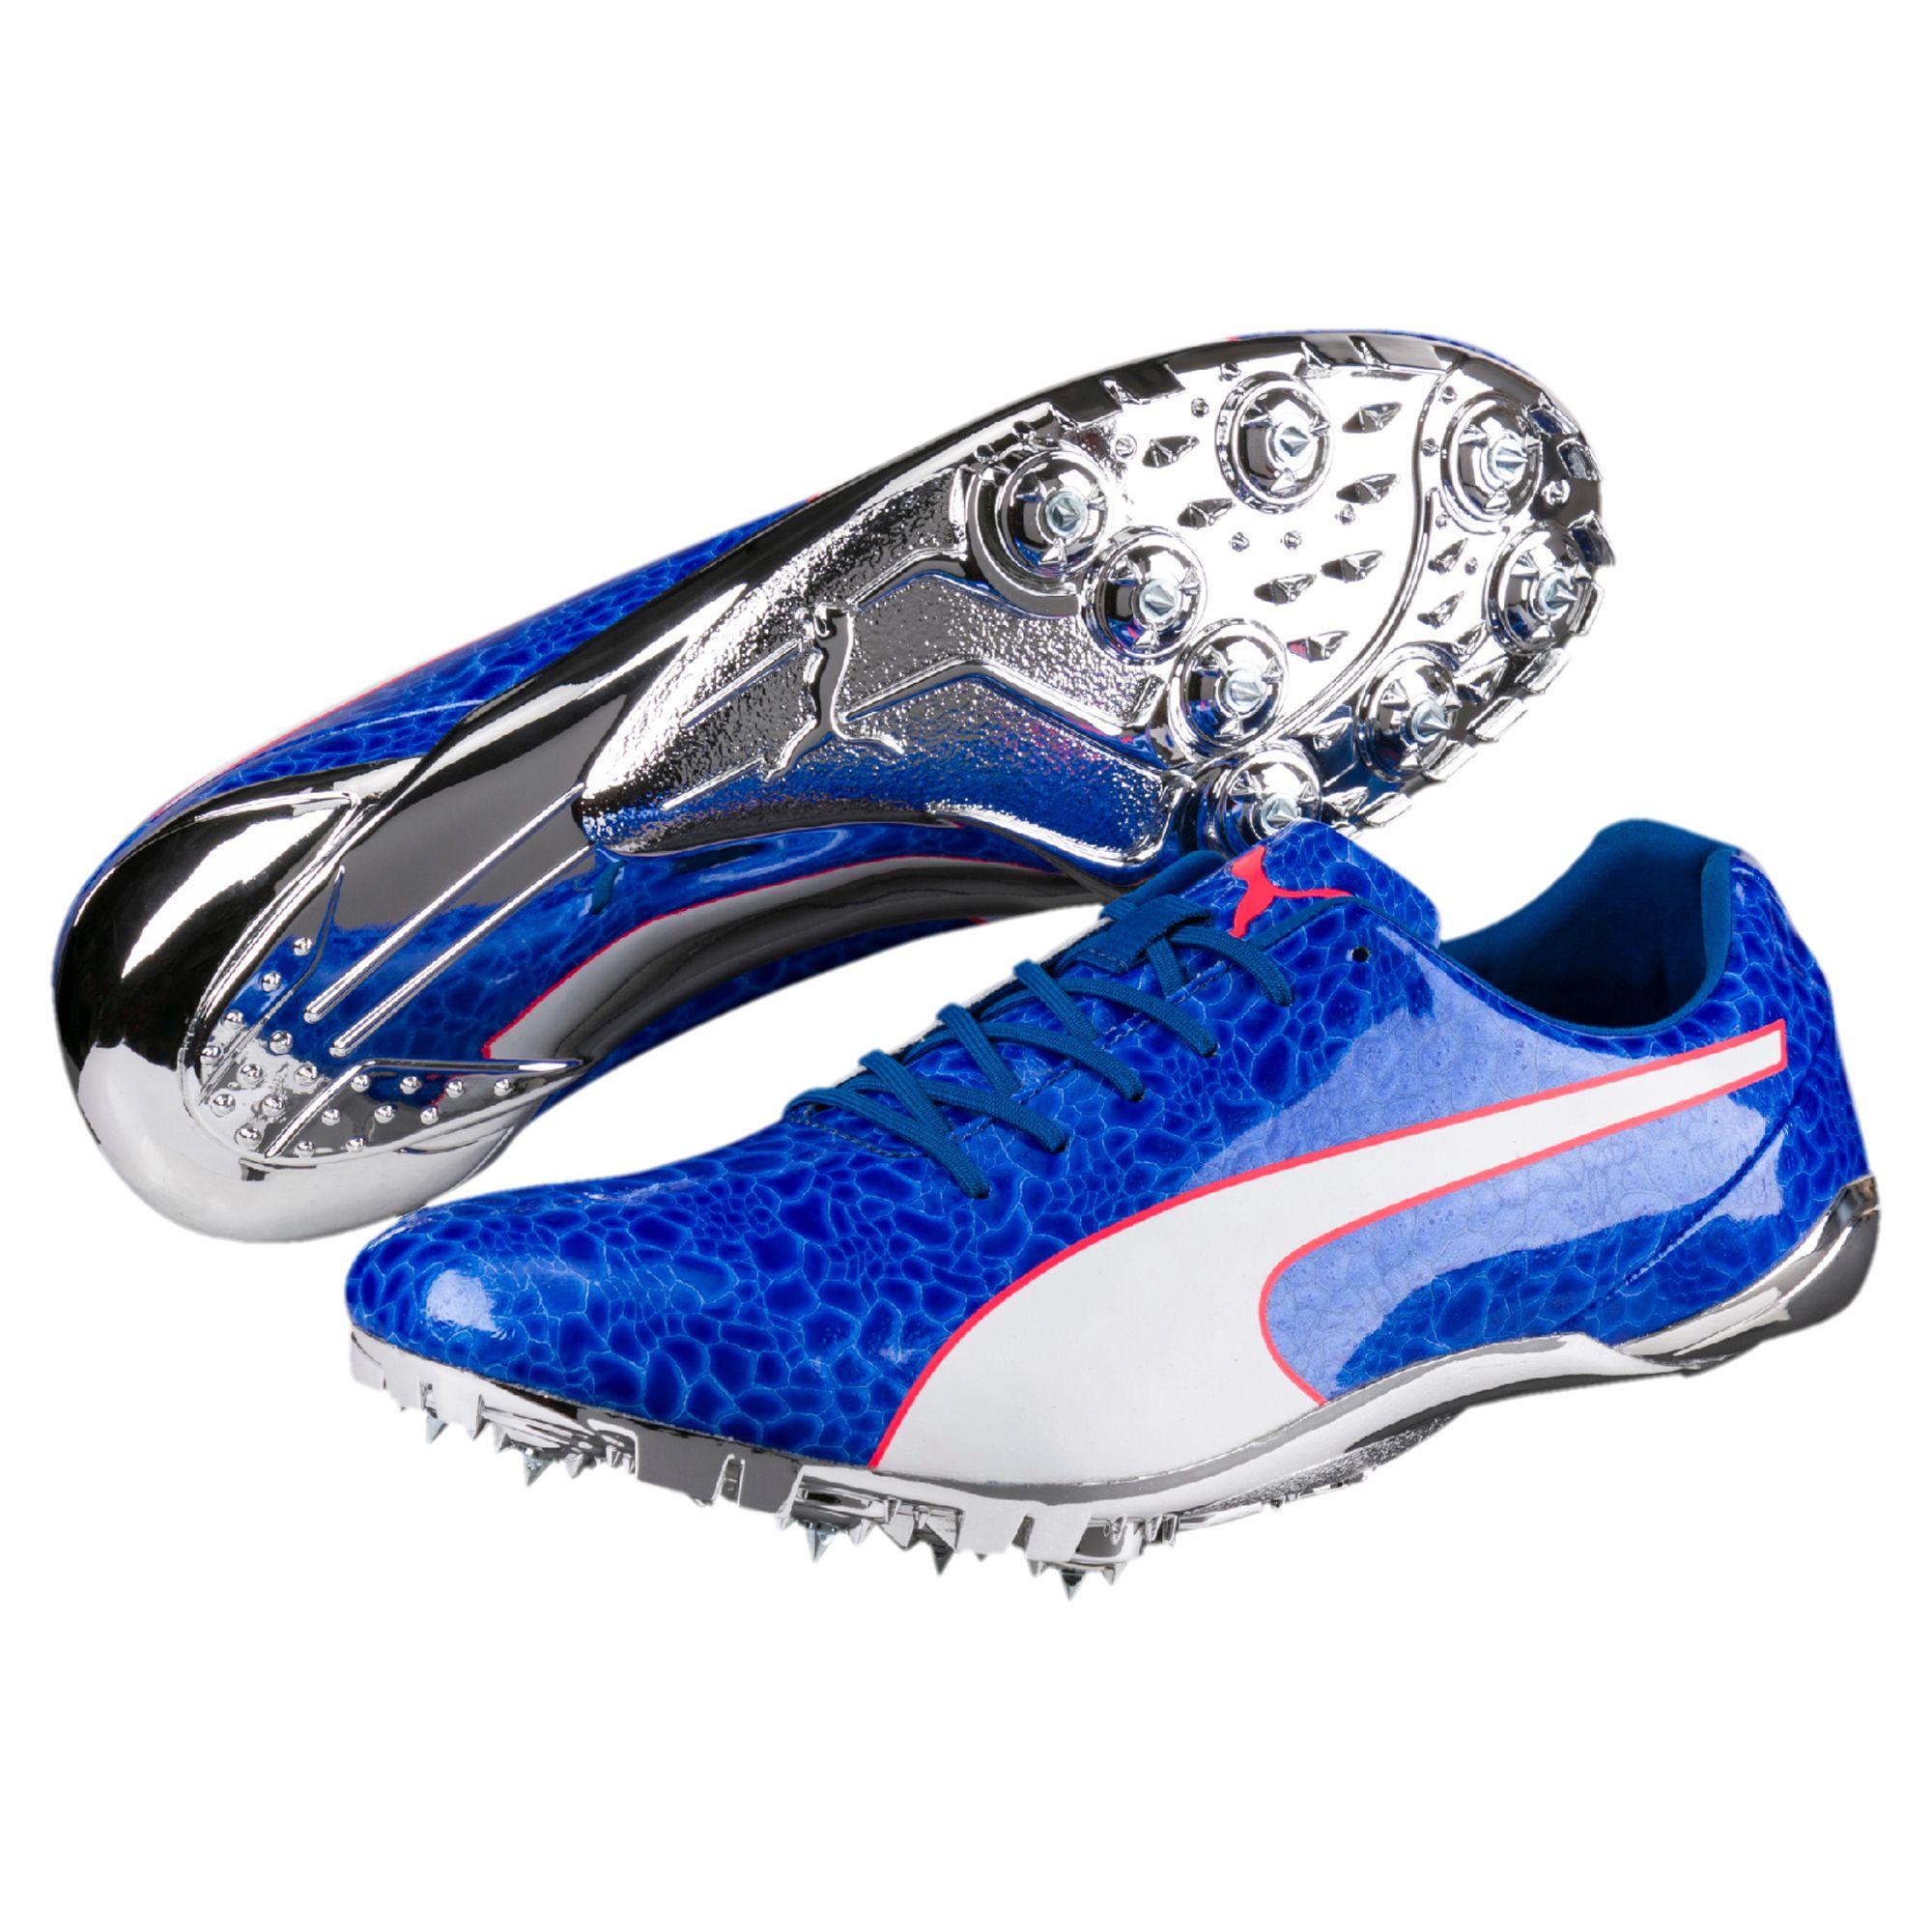 PUMA Synthetic Evospeed Electric 6 Spike Shoes in Blue for Men - Lyst